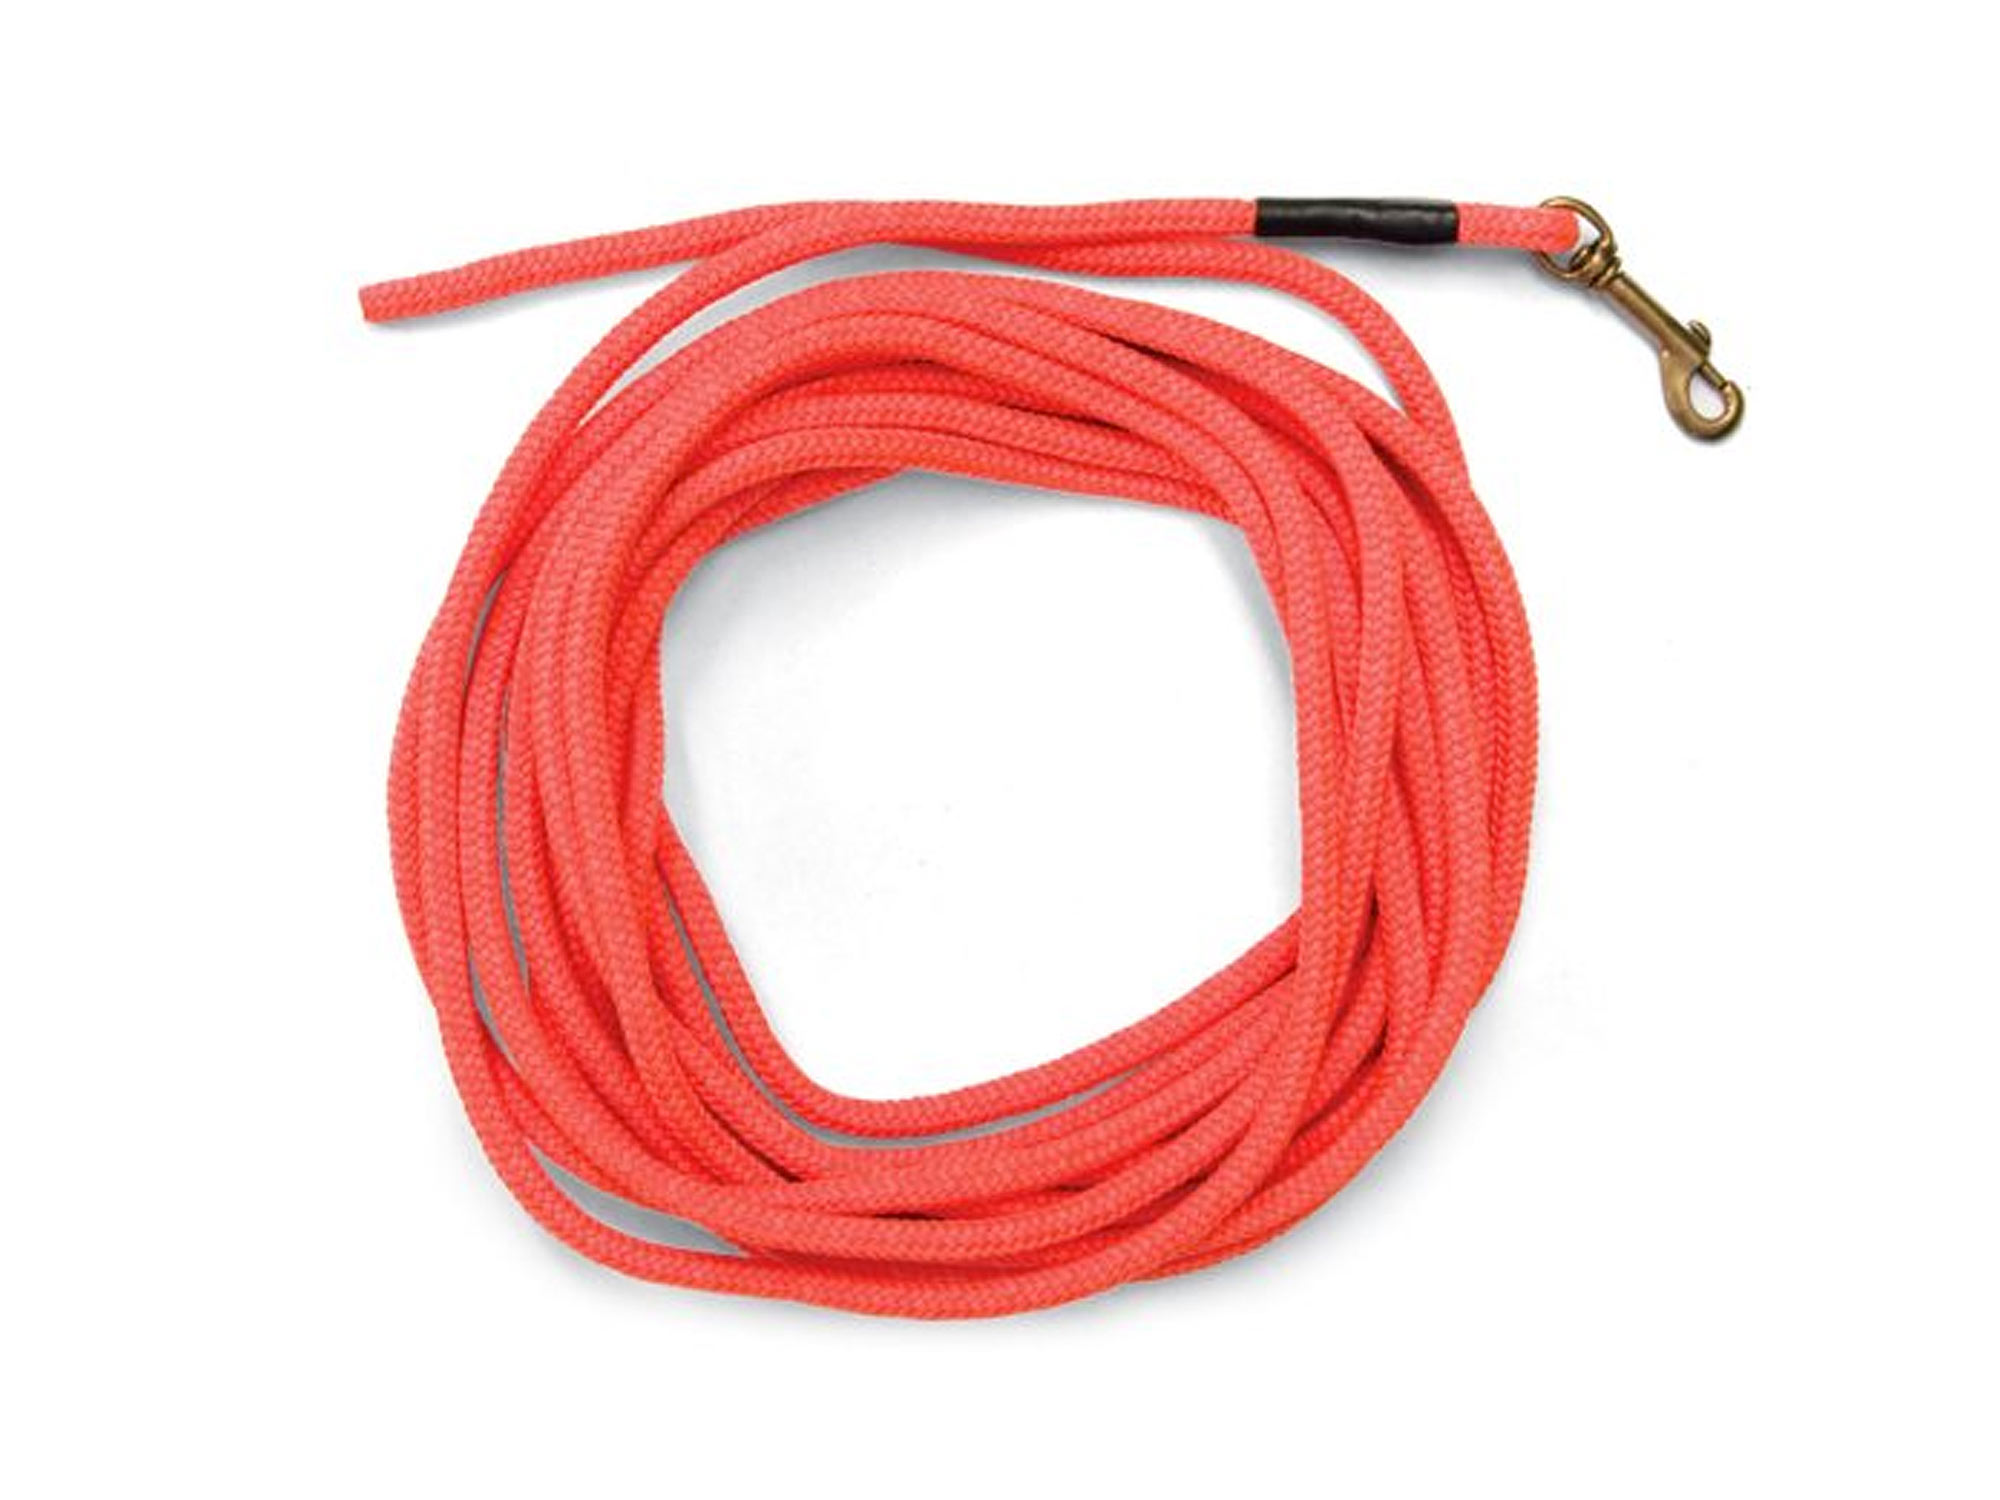 Check cord dog obedience trainer